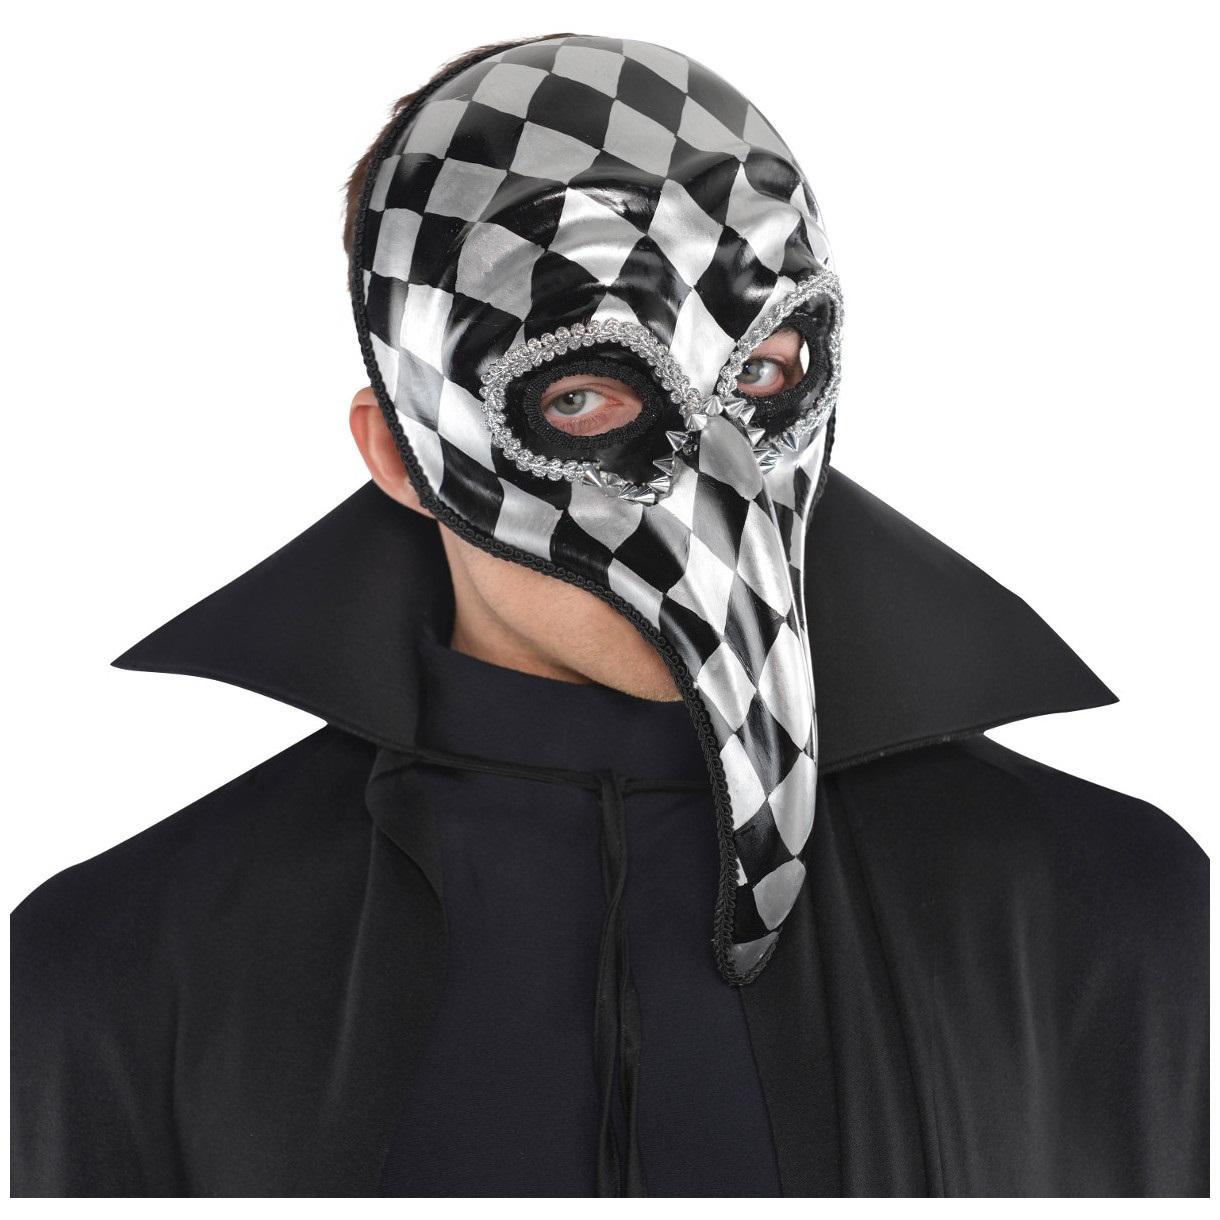 Harlequin Jester Mask Costumes & Apparel - Party Centre